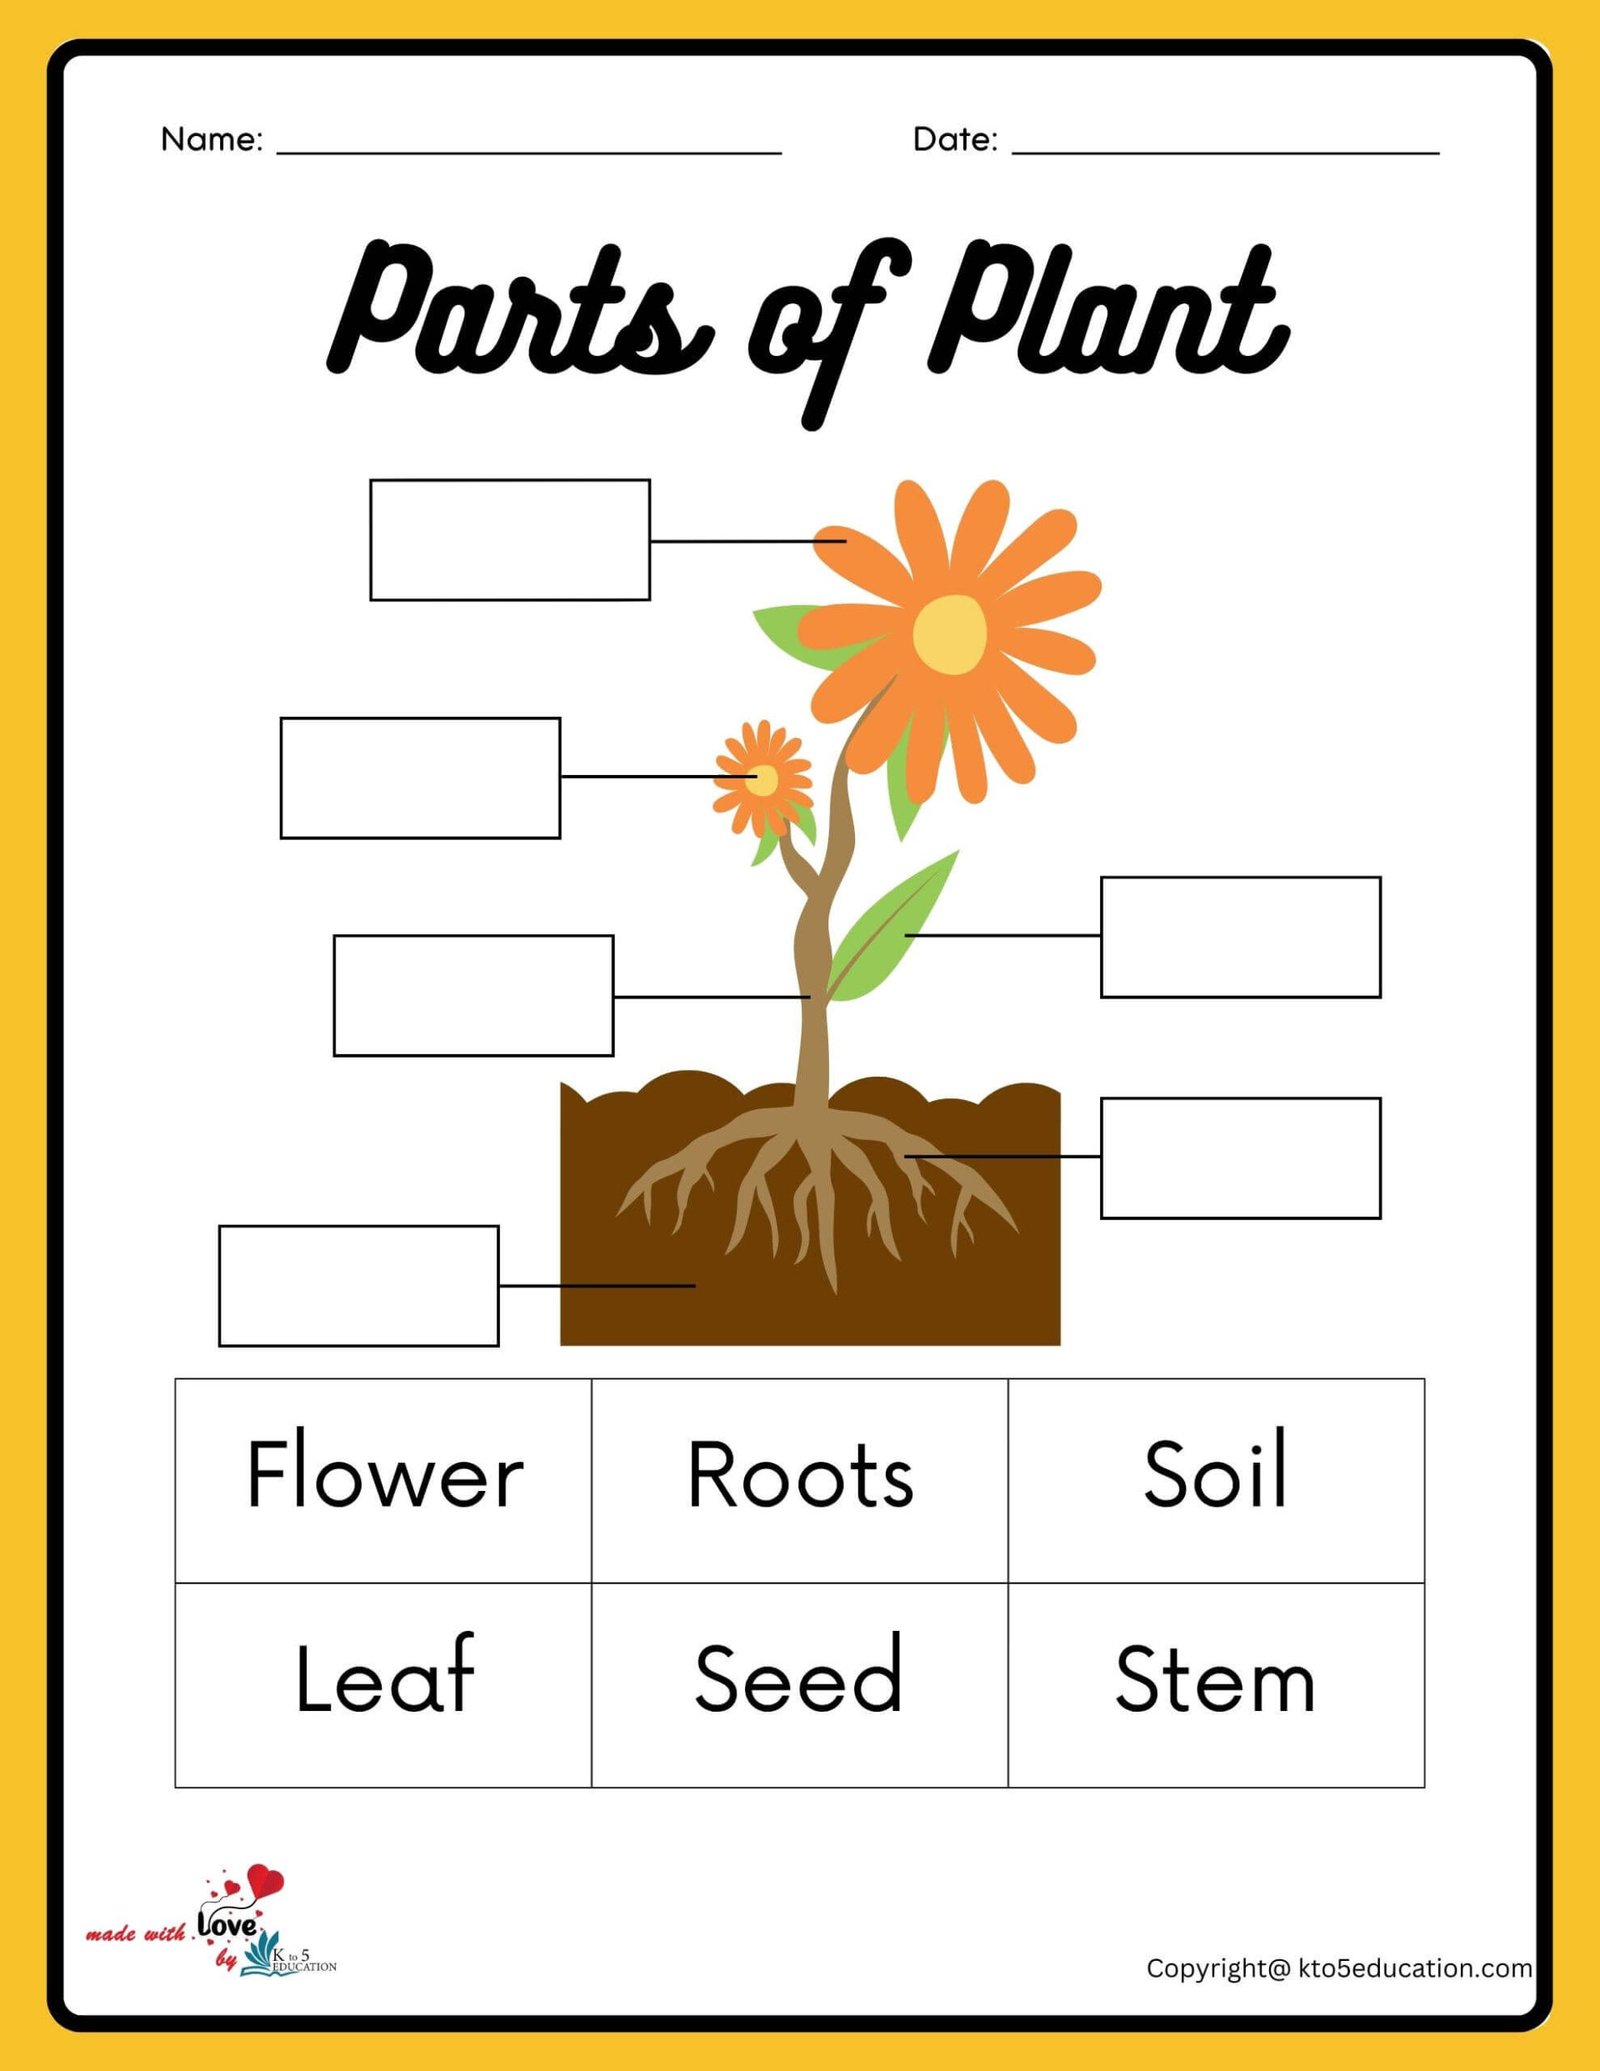 All Parts Of Flower Plants Worksheet | FREE Download